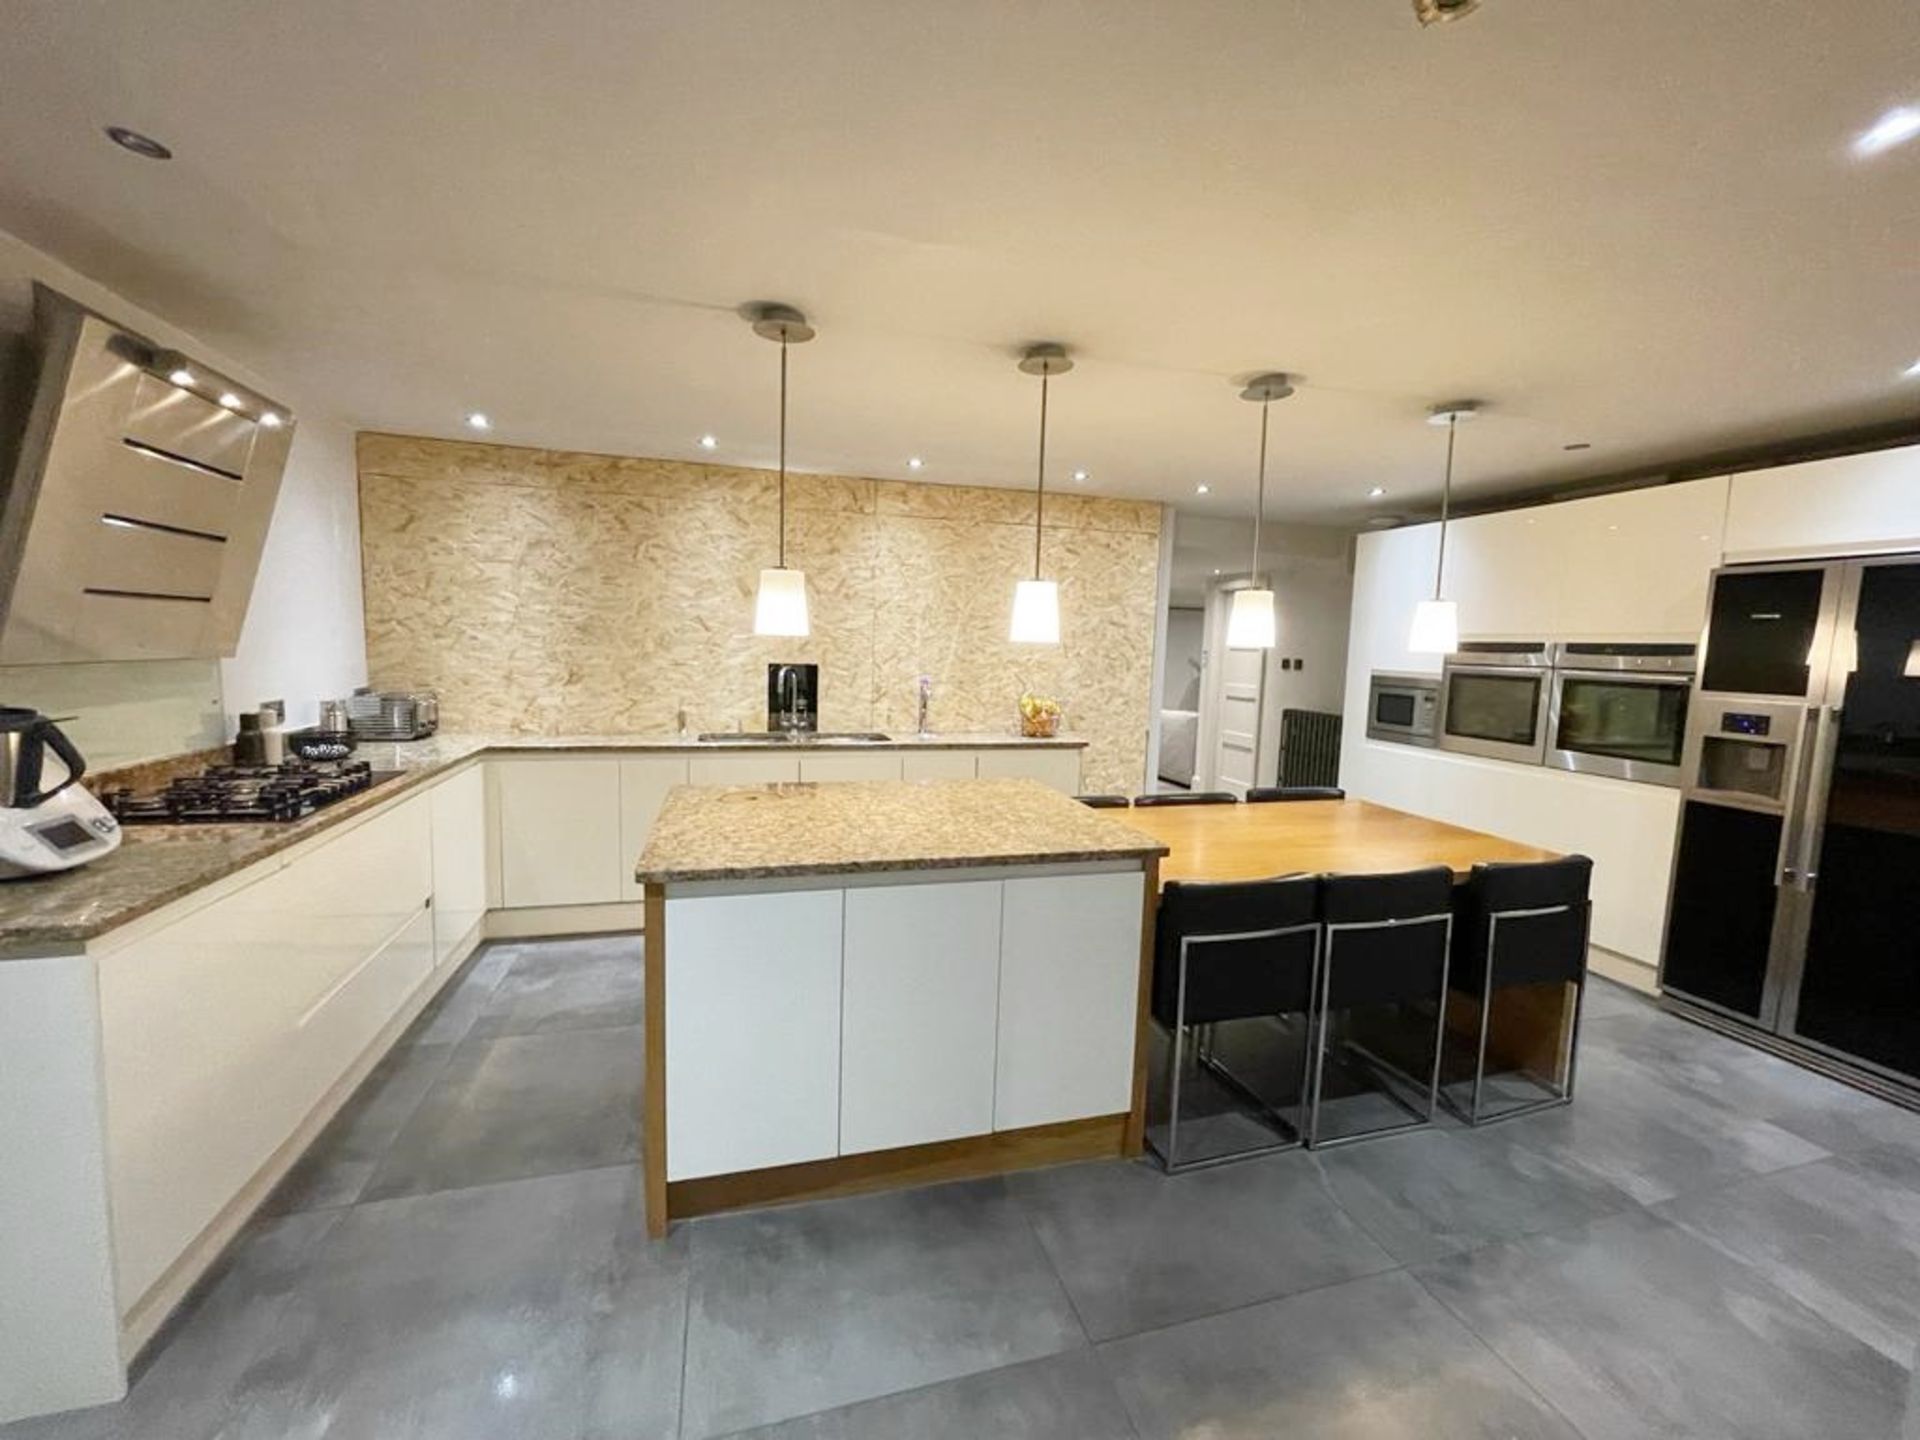 1 x Stunning PARAPAN Handleless Fitted Kitchen with Neff Appliances, Granite Worktops & Island - Image 101 of 126